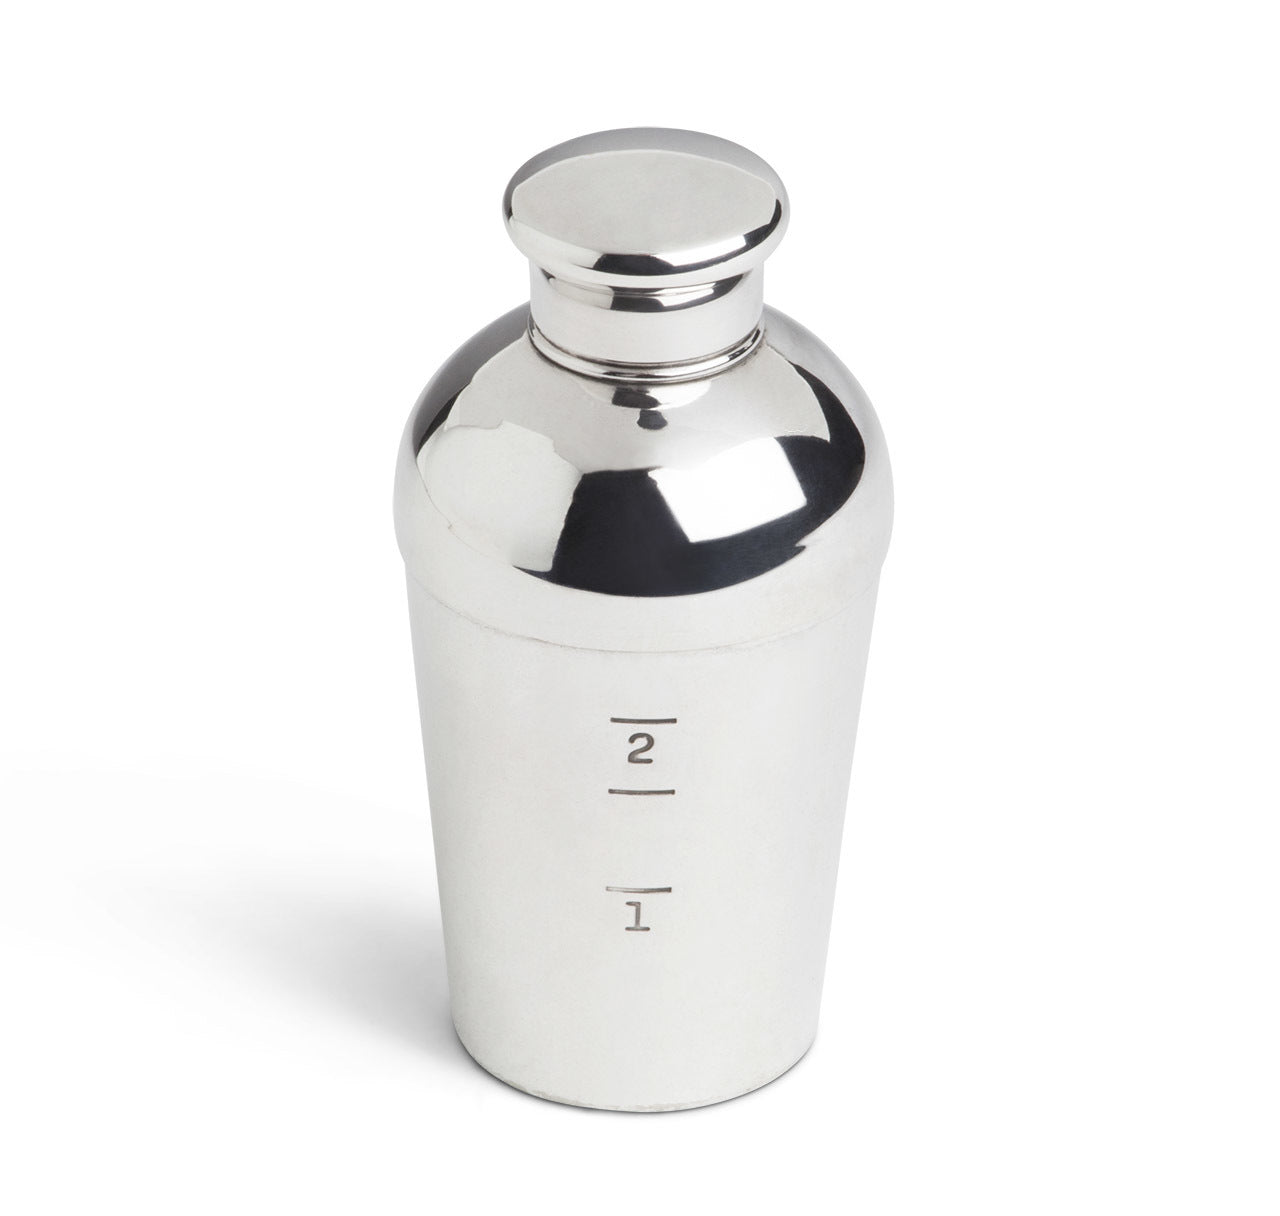 Napier Silver-Plated Cocktail Shaker Jigger